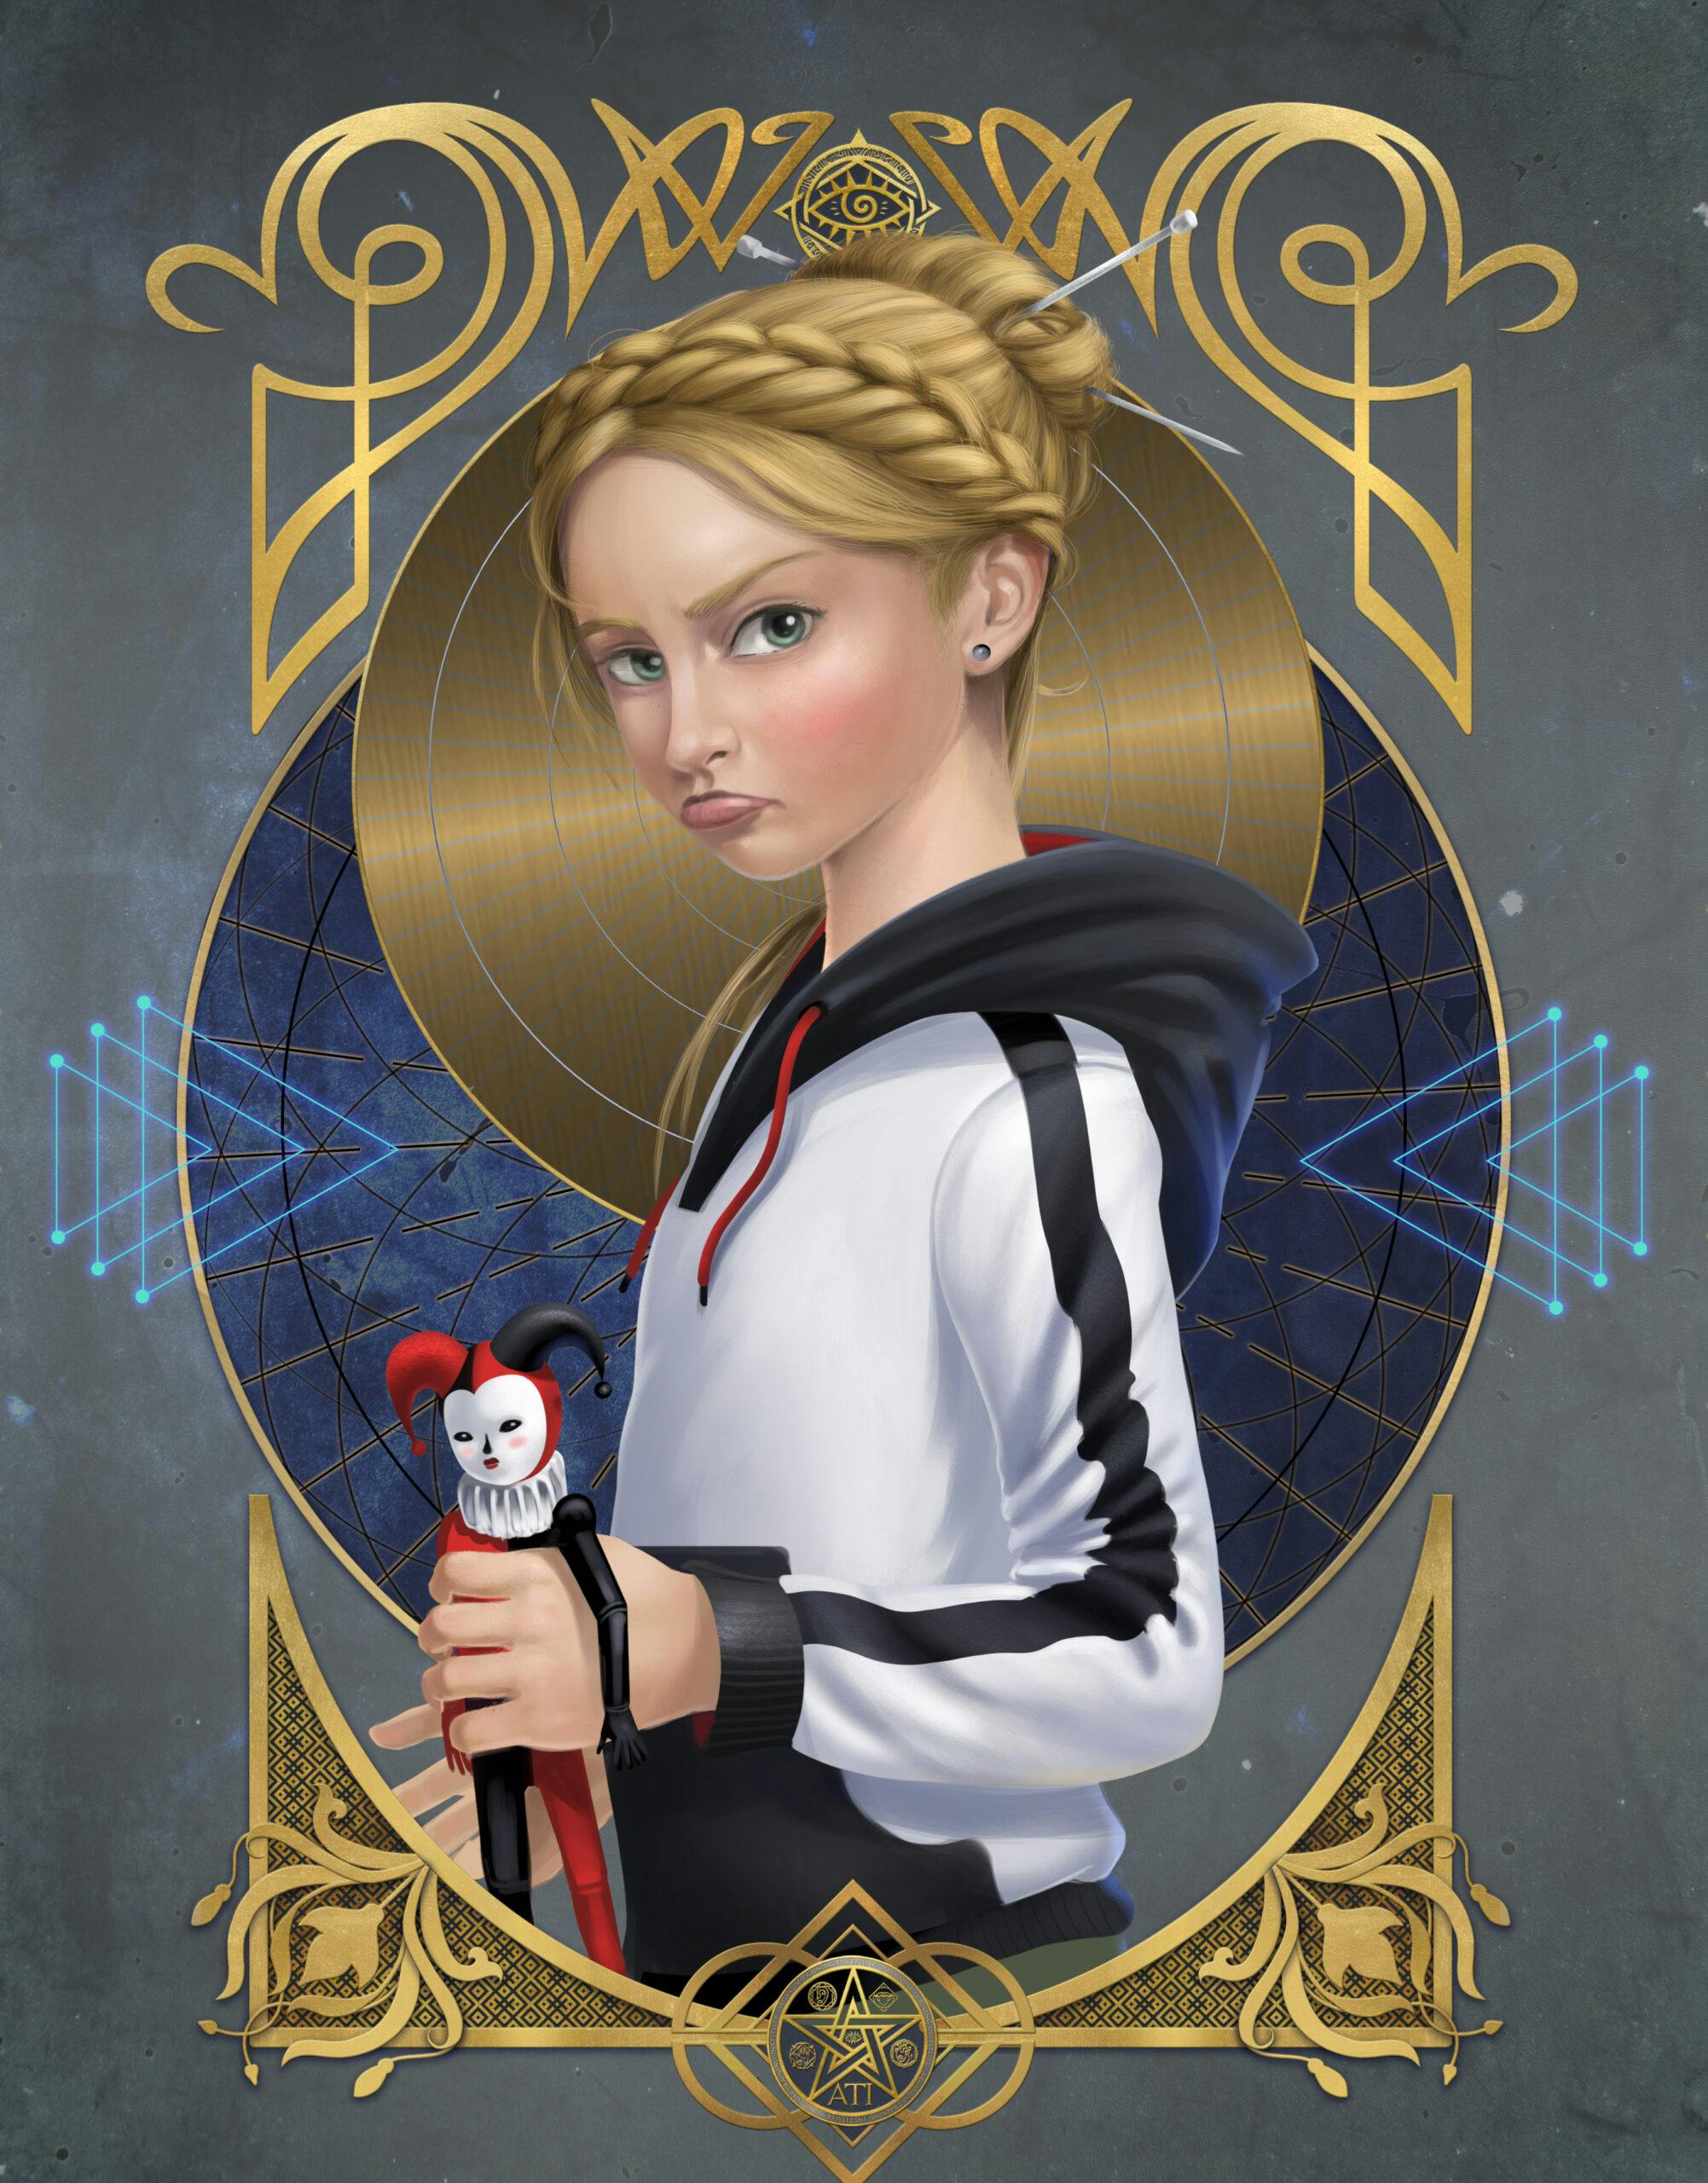 White pre-teen girl with blonde hair in an updo with a braid, wearing a black and white tracksuit and holding a small clown doll. She has a menacing look on her face